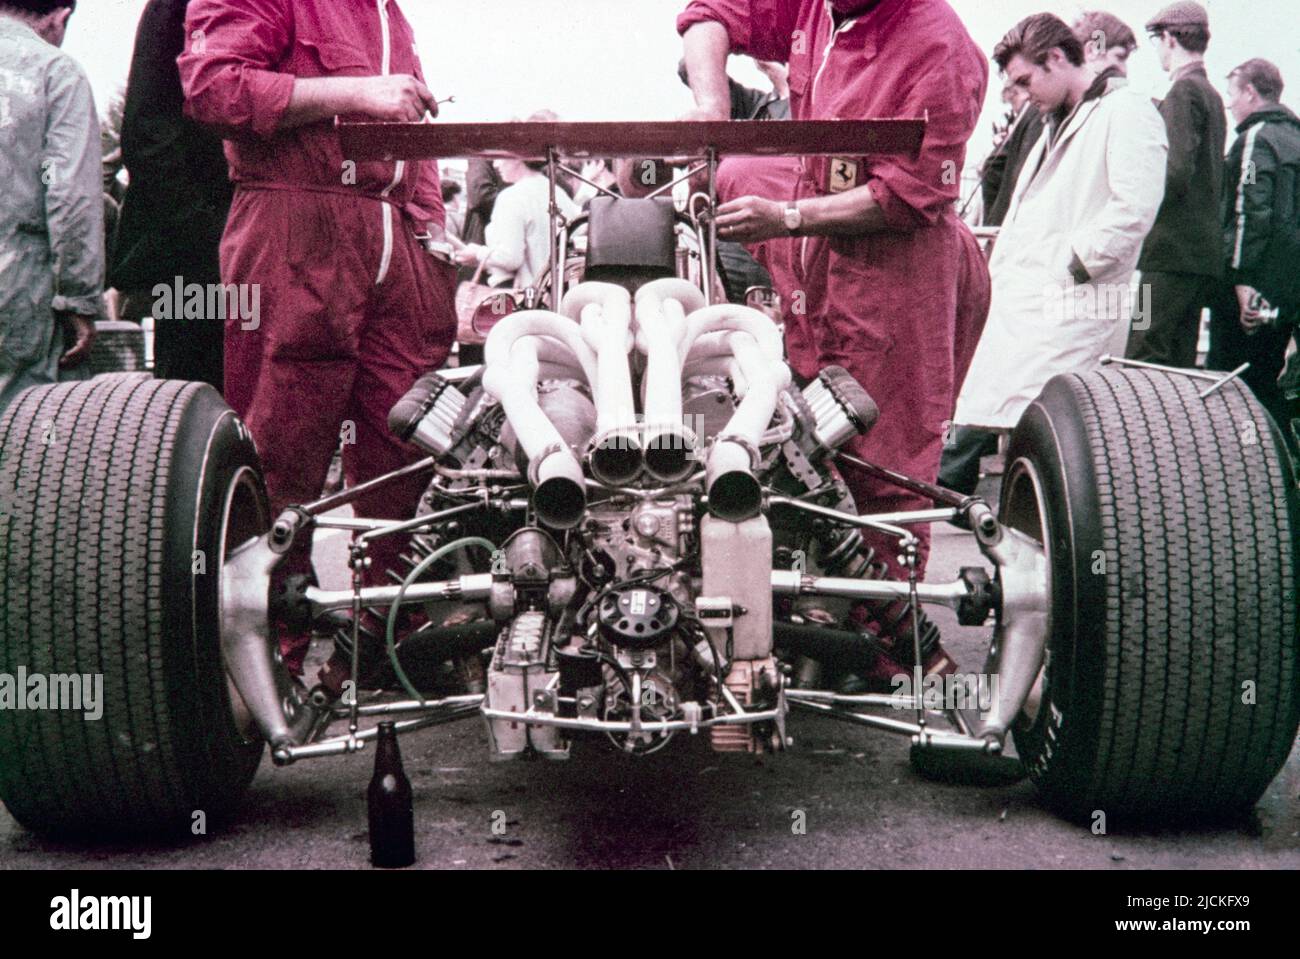 1968 British Formula 1 Grand Prix at Brands Hatch. Ferrari mechanics working on the V12 Engine of the Ferrari 312 driven by Chris Amon. He finished 2nd in the race. Stock Photo